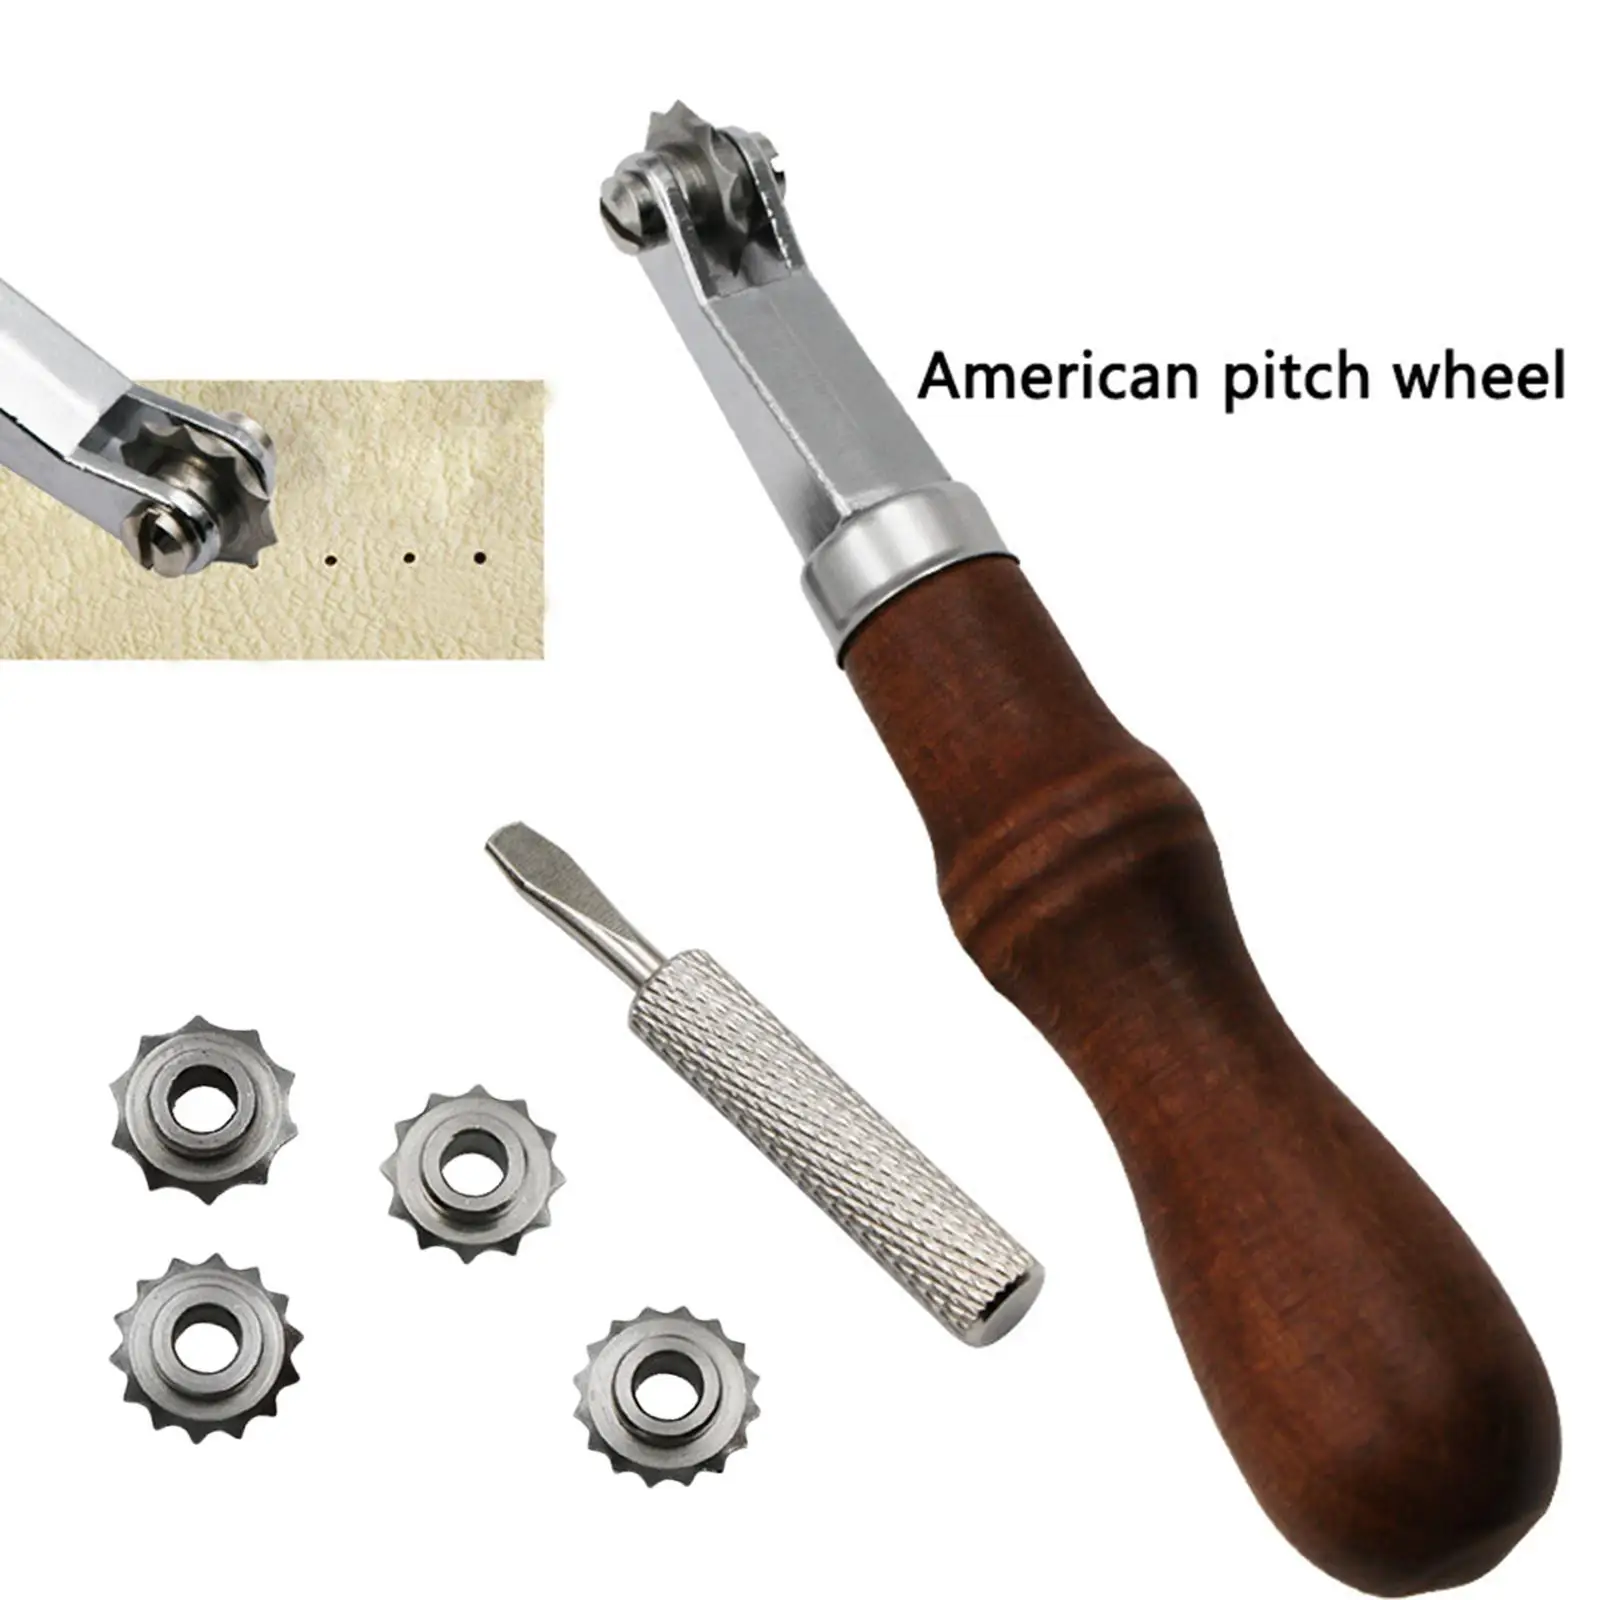 Tracing Wheel - Professional Stitch Marking Spacer,  Tracing Wheel with Wooden Handle for Arts and Leather Crafts